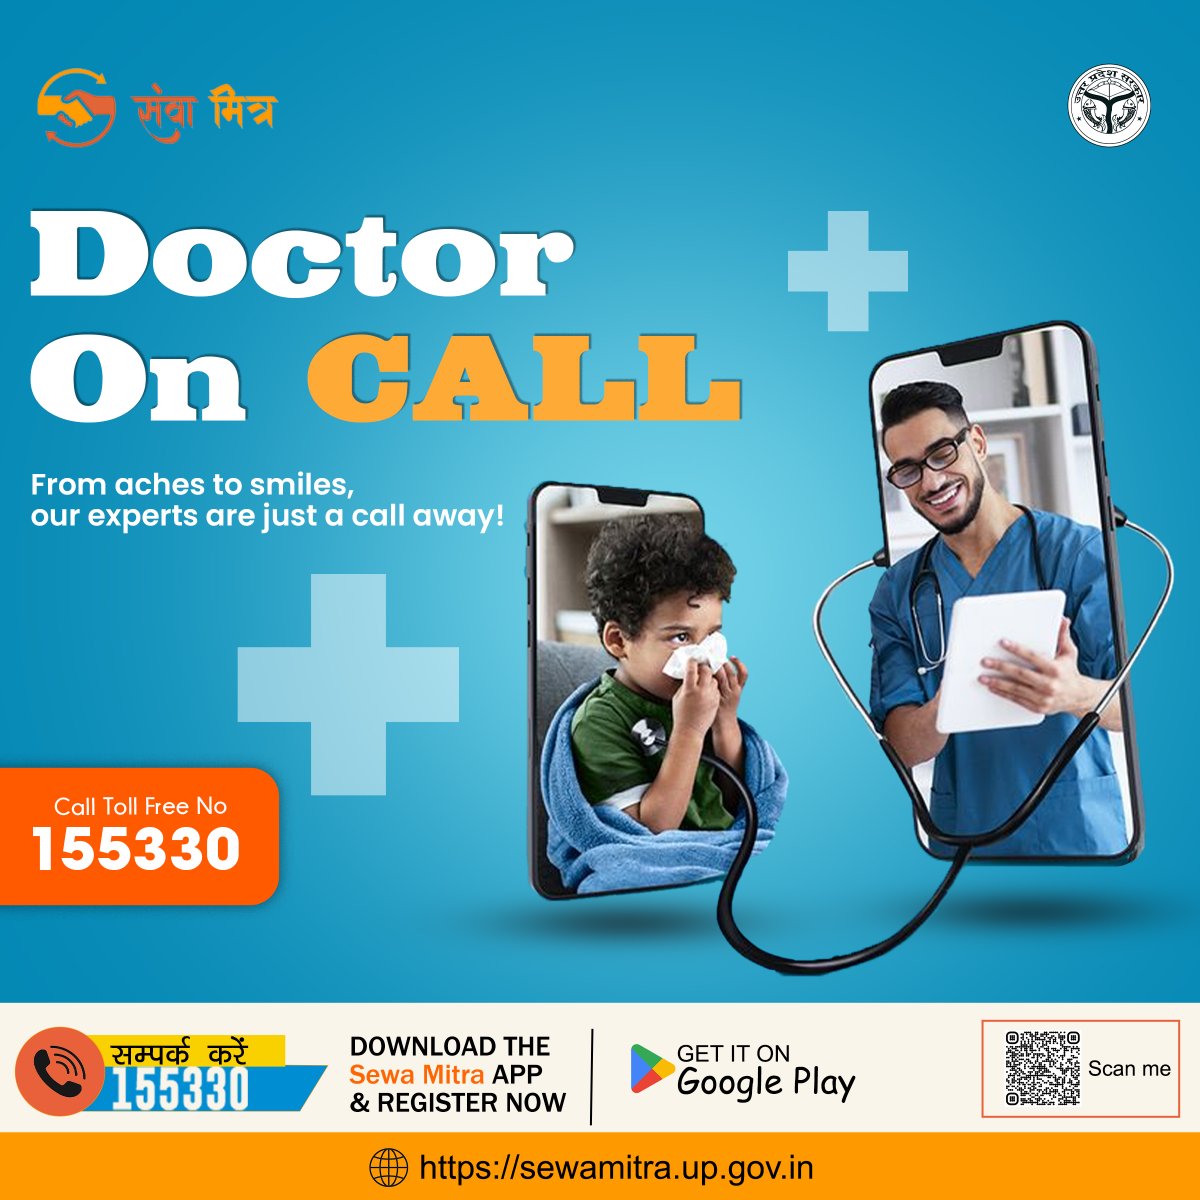 Call Toll-Free No. 155330 📞 for Our Doctor-On-Call Services, 💉👩‍⚕️

Personalized Medical Attention 24/7 at Your Home. 🏠💊

Visit: sewamitra.up.gov.in

#SewaMitra #SewaMitraServices #doctoroncall #sickcare #telehealth #healthcare #medicaladvice #wellbeing #peaceofmind